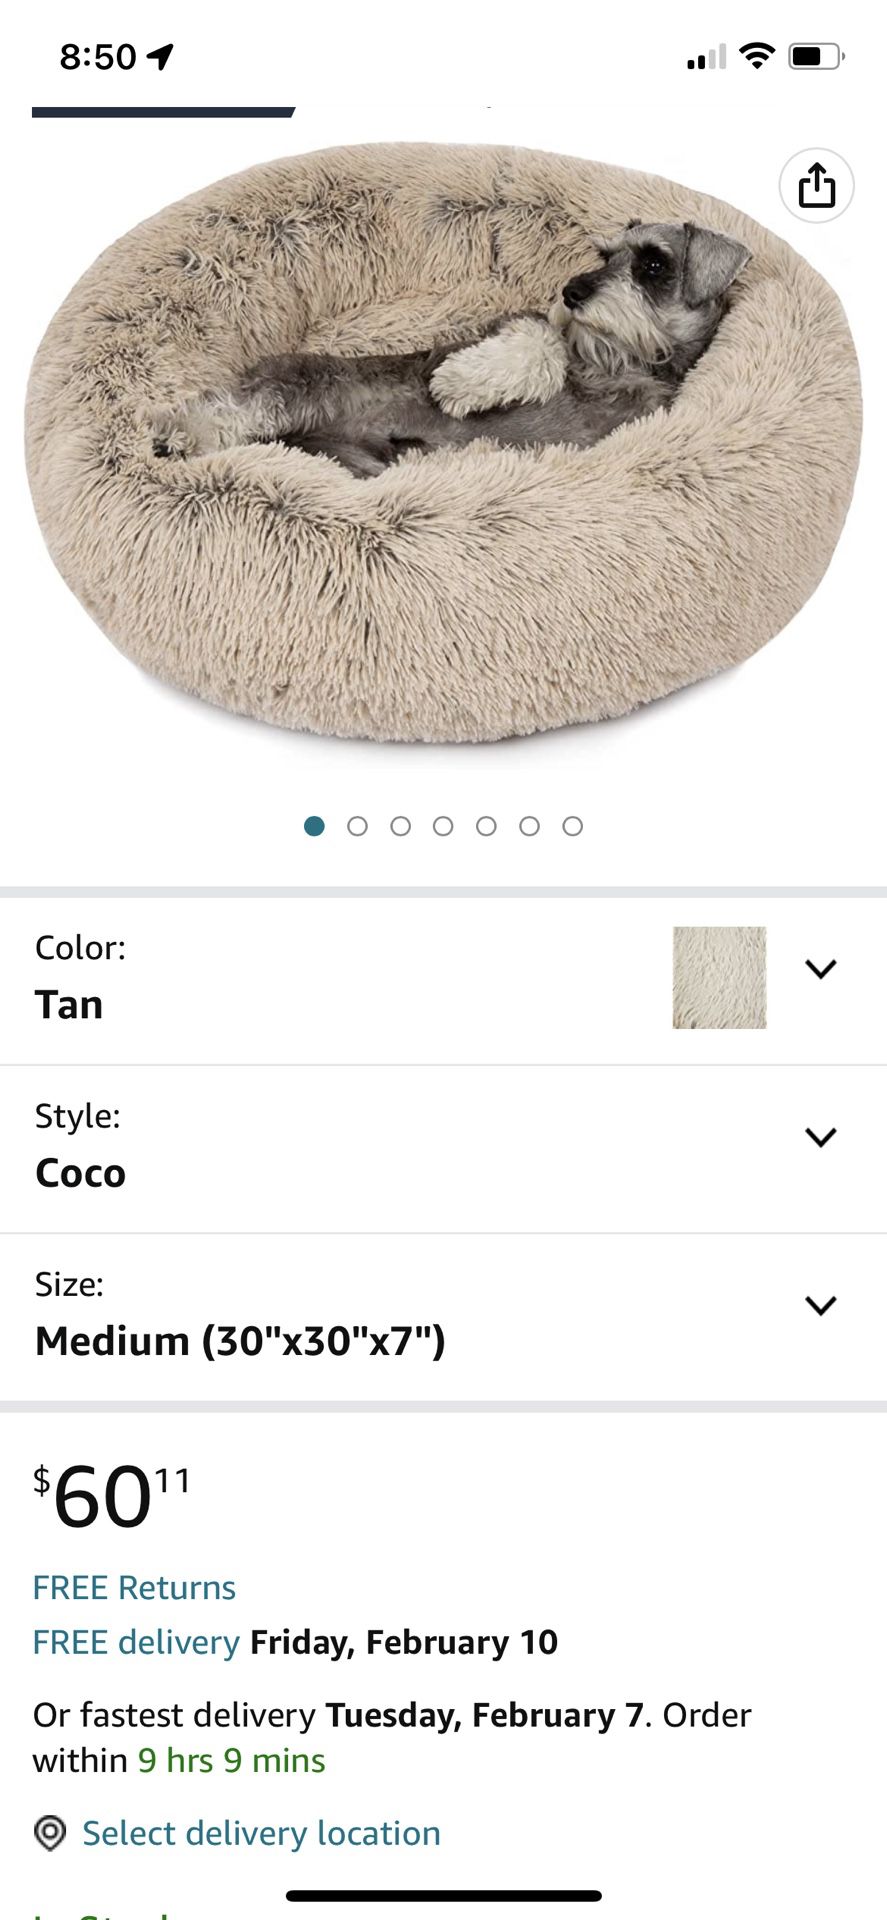 Friends Forever Coco Donut Dog Bed, Soft Faux Fur Cat Couch For Indoor Pet, Fluffy Calming Plush Shag, Round Raised Rim Bolster Cushion, Machine Washa